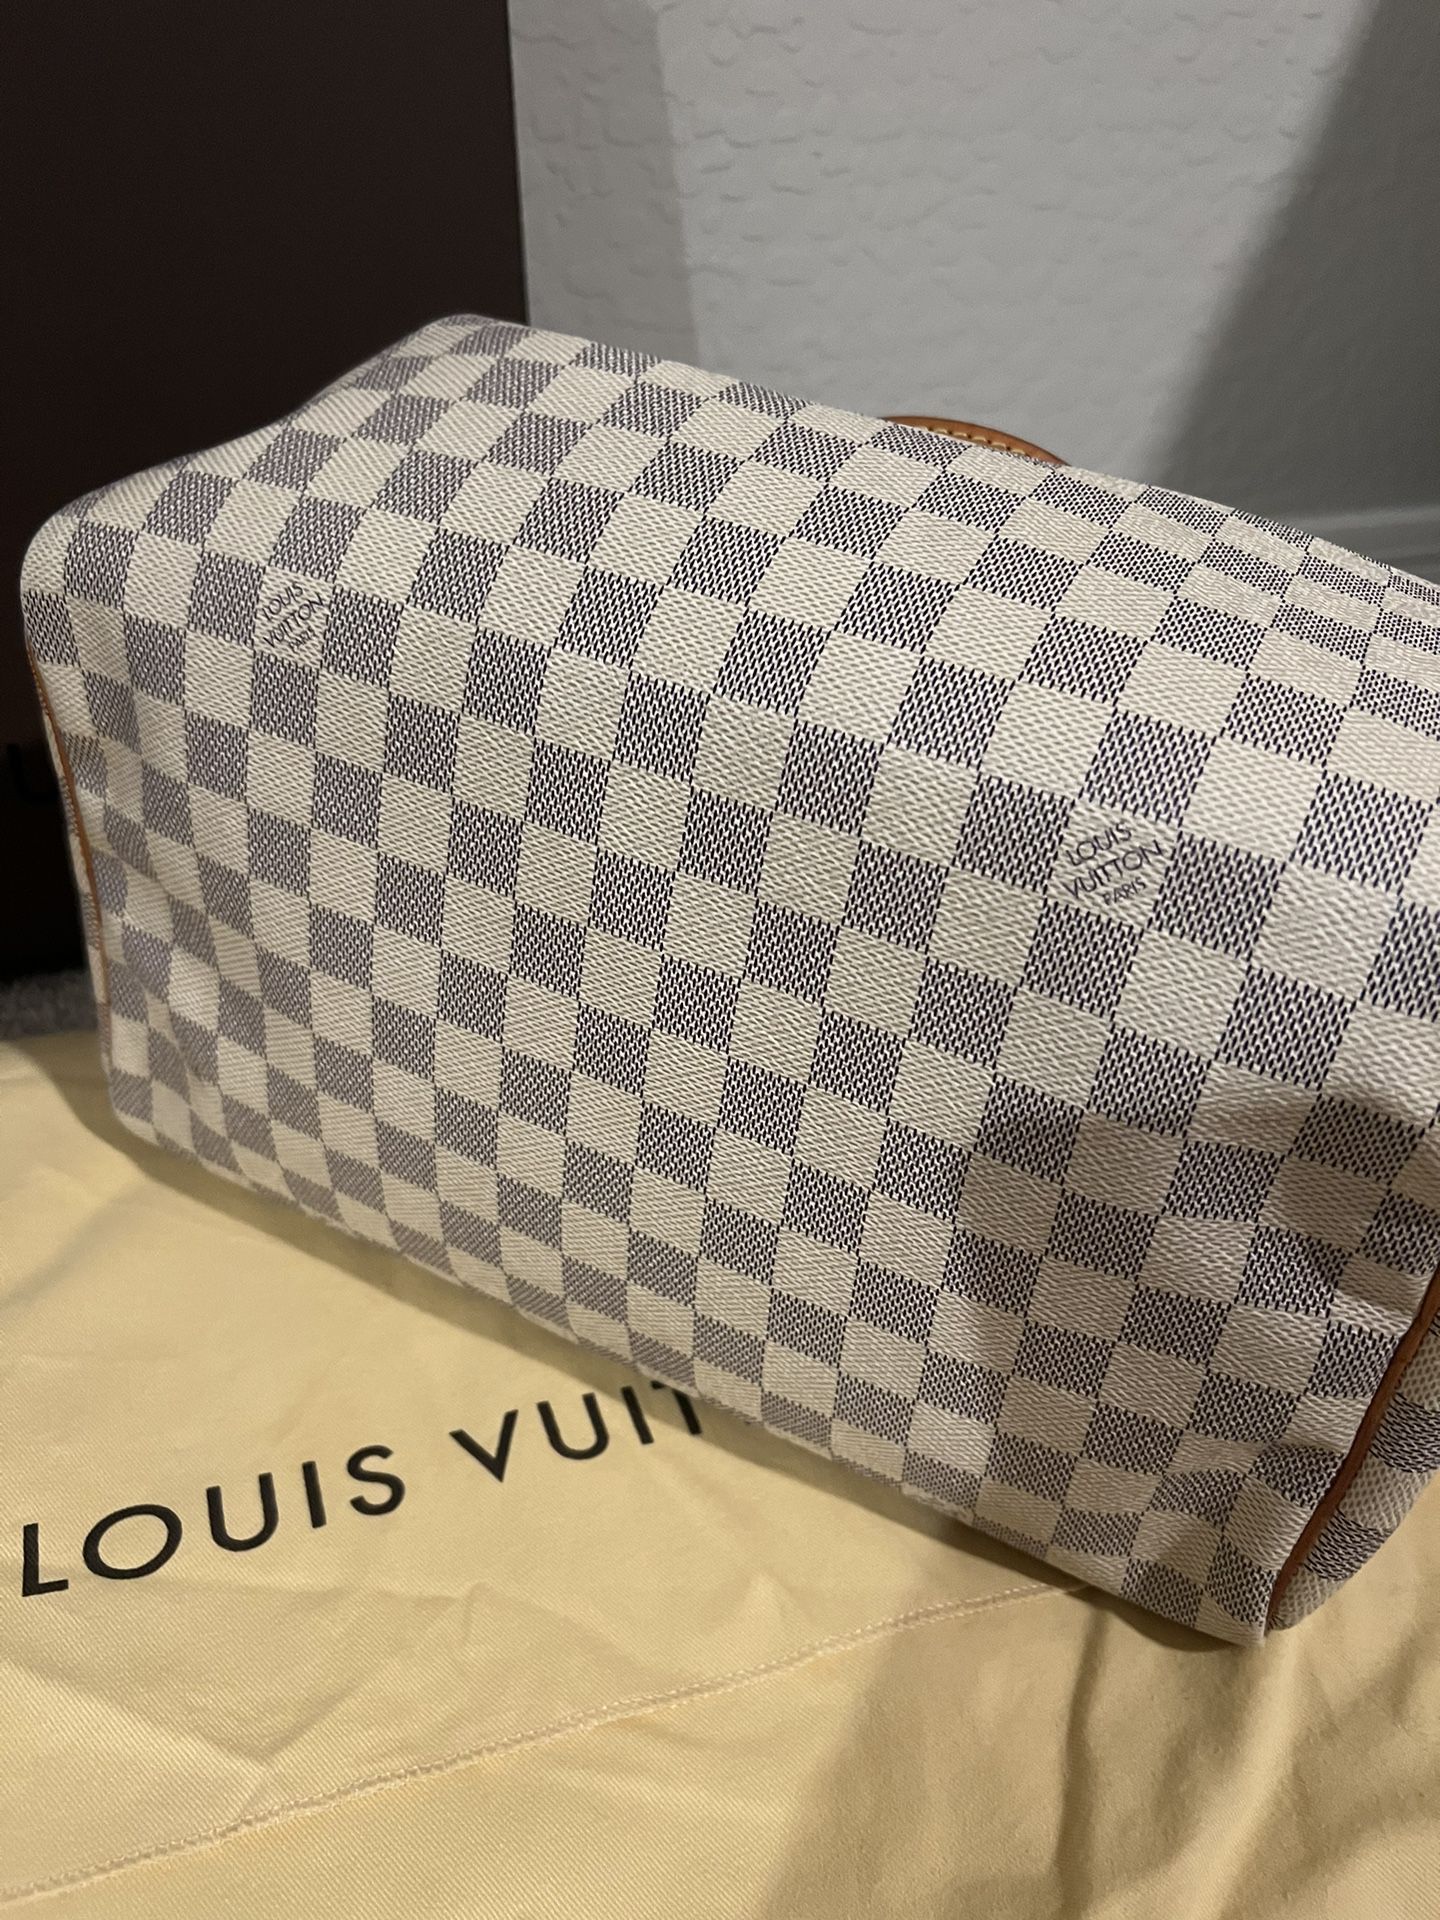 Authentic Louis Vuitton Damier Azur Speedy 30 Bandouliere for Sale in  Puyallup, WA - OfferUp